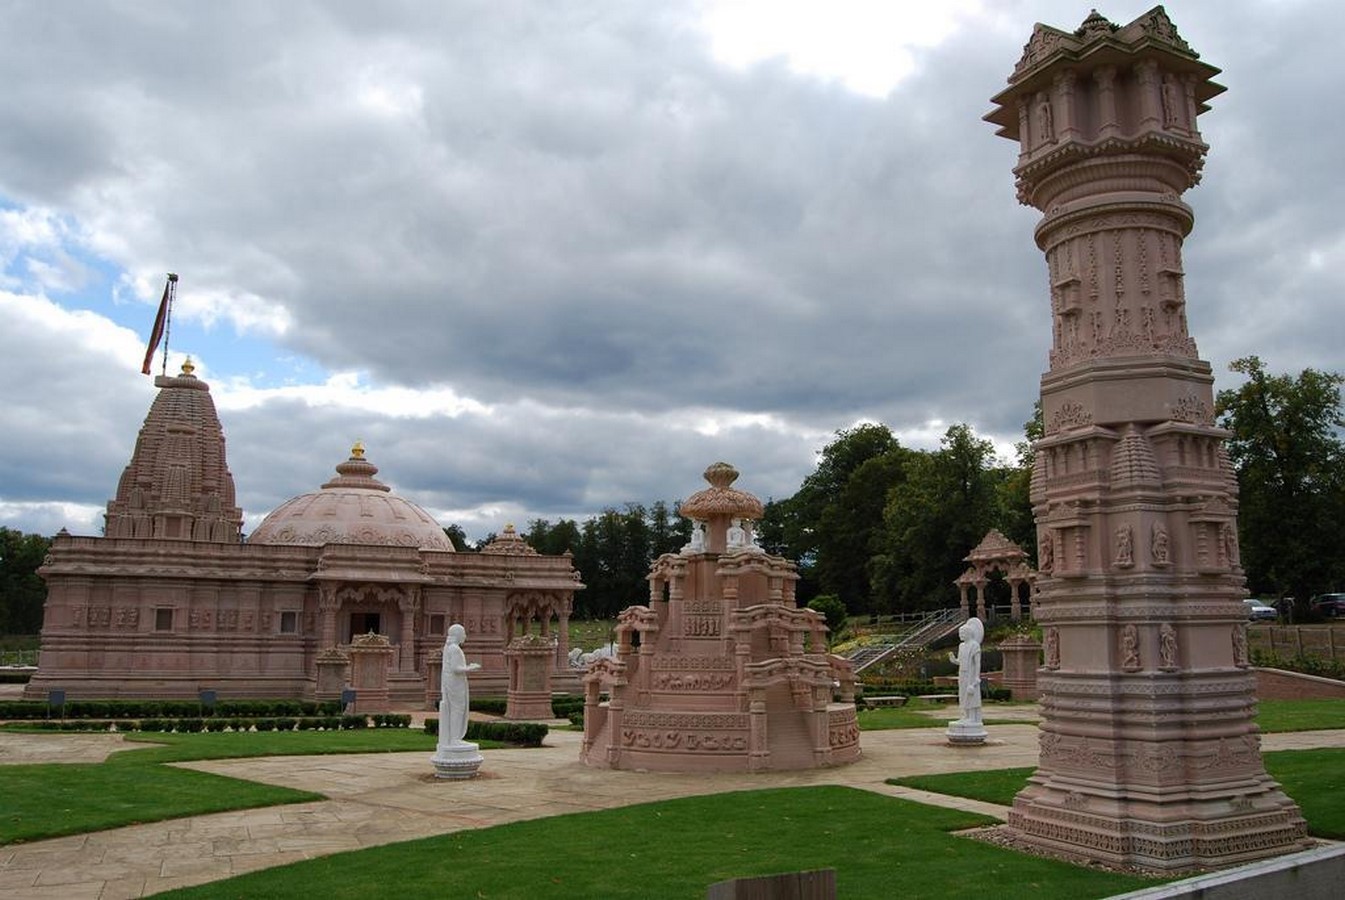 An overview of architecture in Jain temples - Sheet1